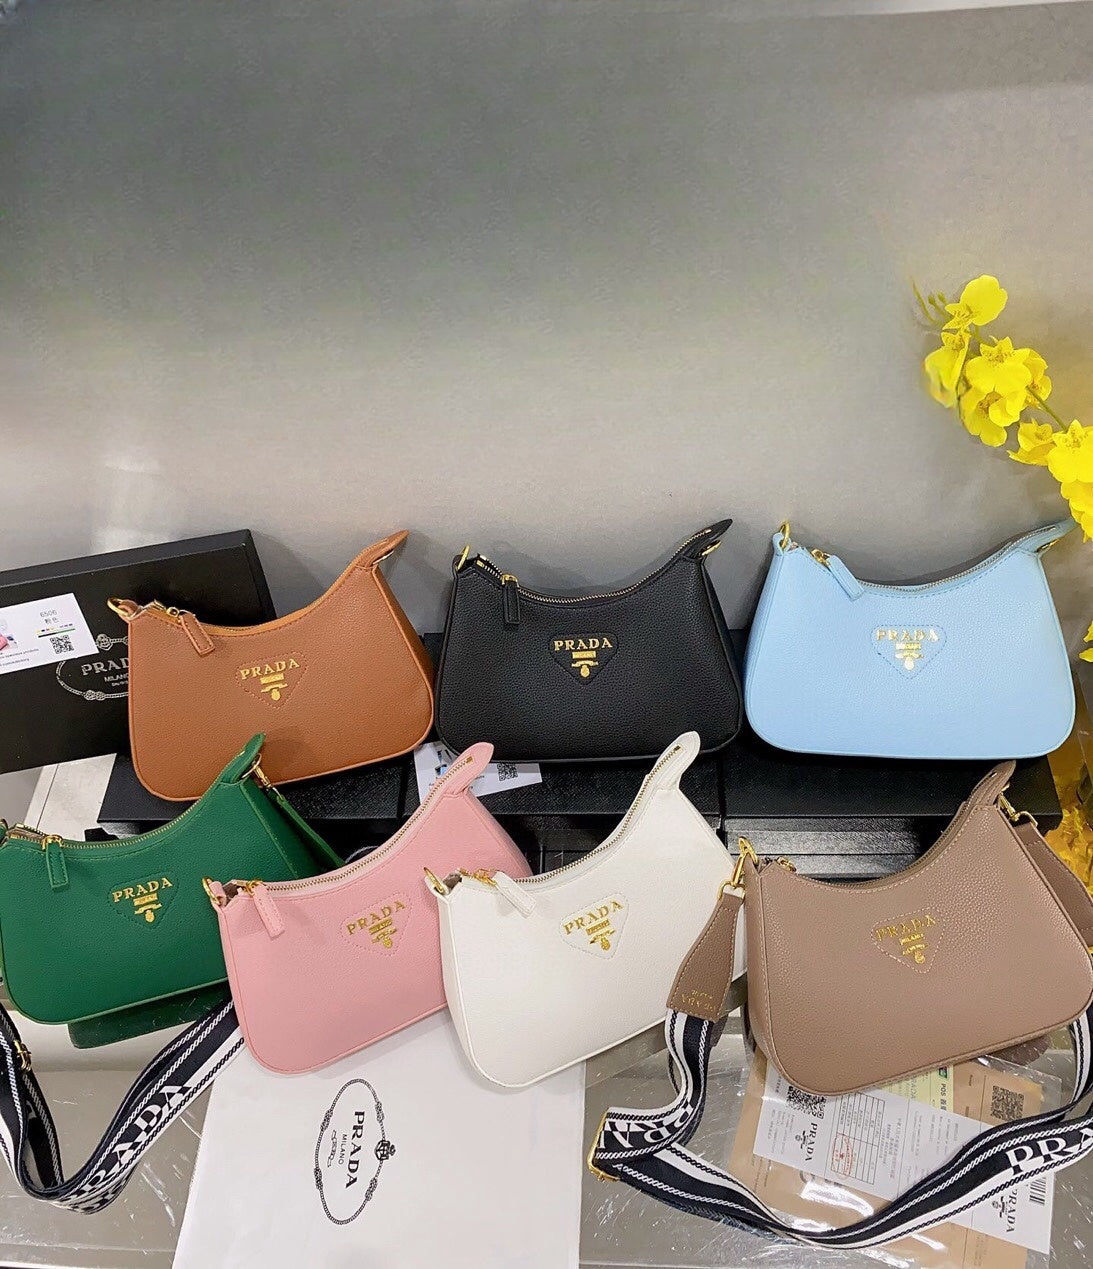 Colorful bags, do you have any colors you like? Very versatile, classic style.